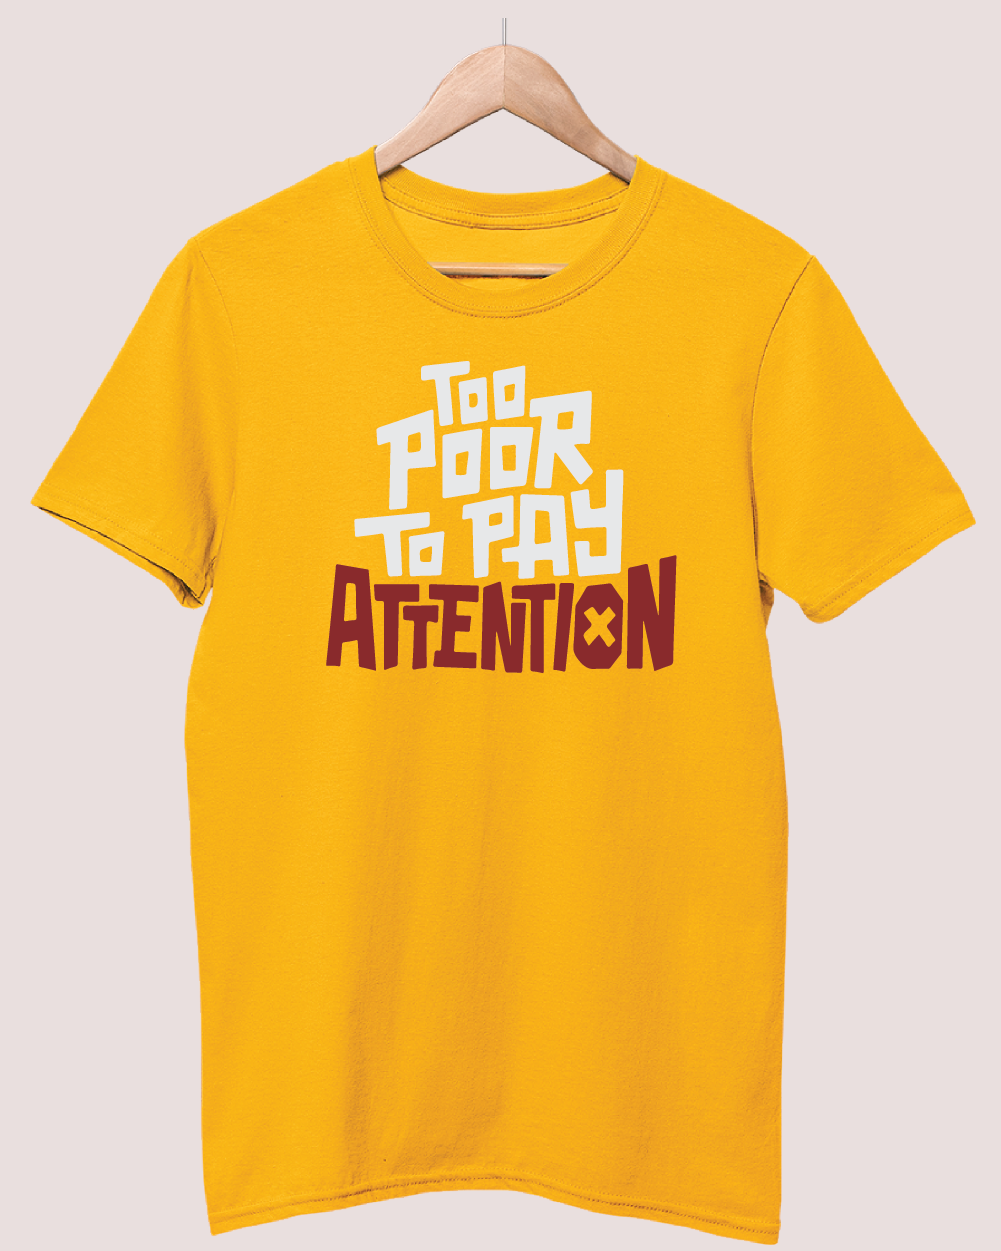 Too Poor To Pay Attention t-shirt